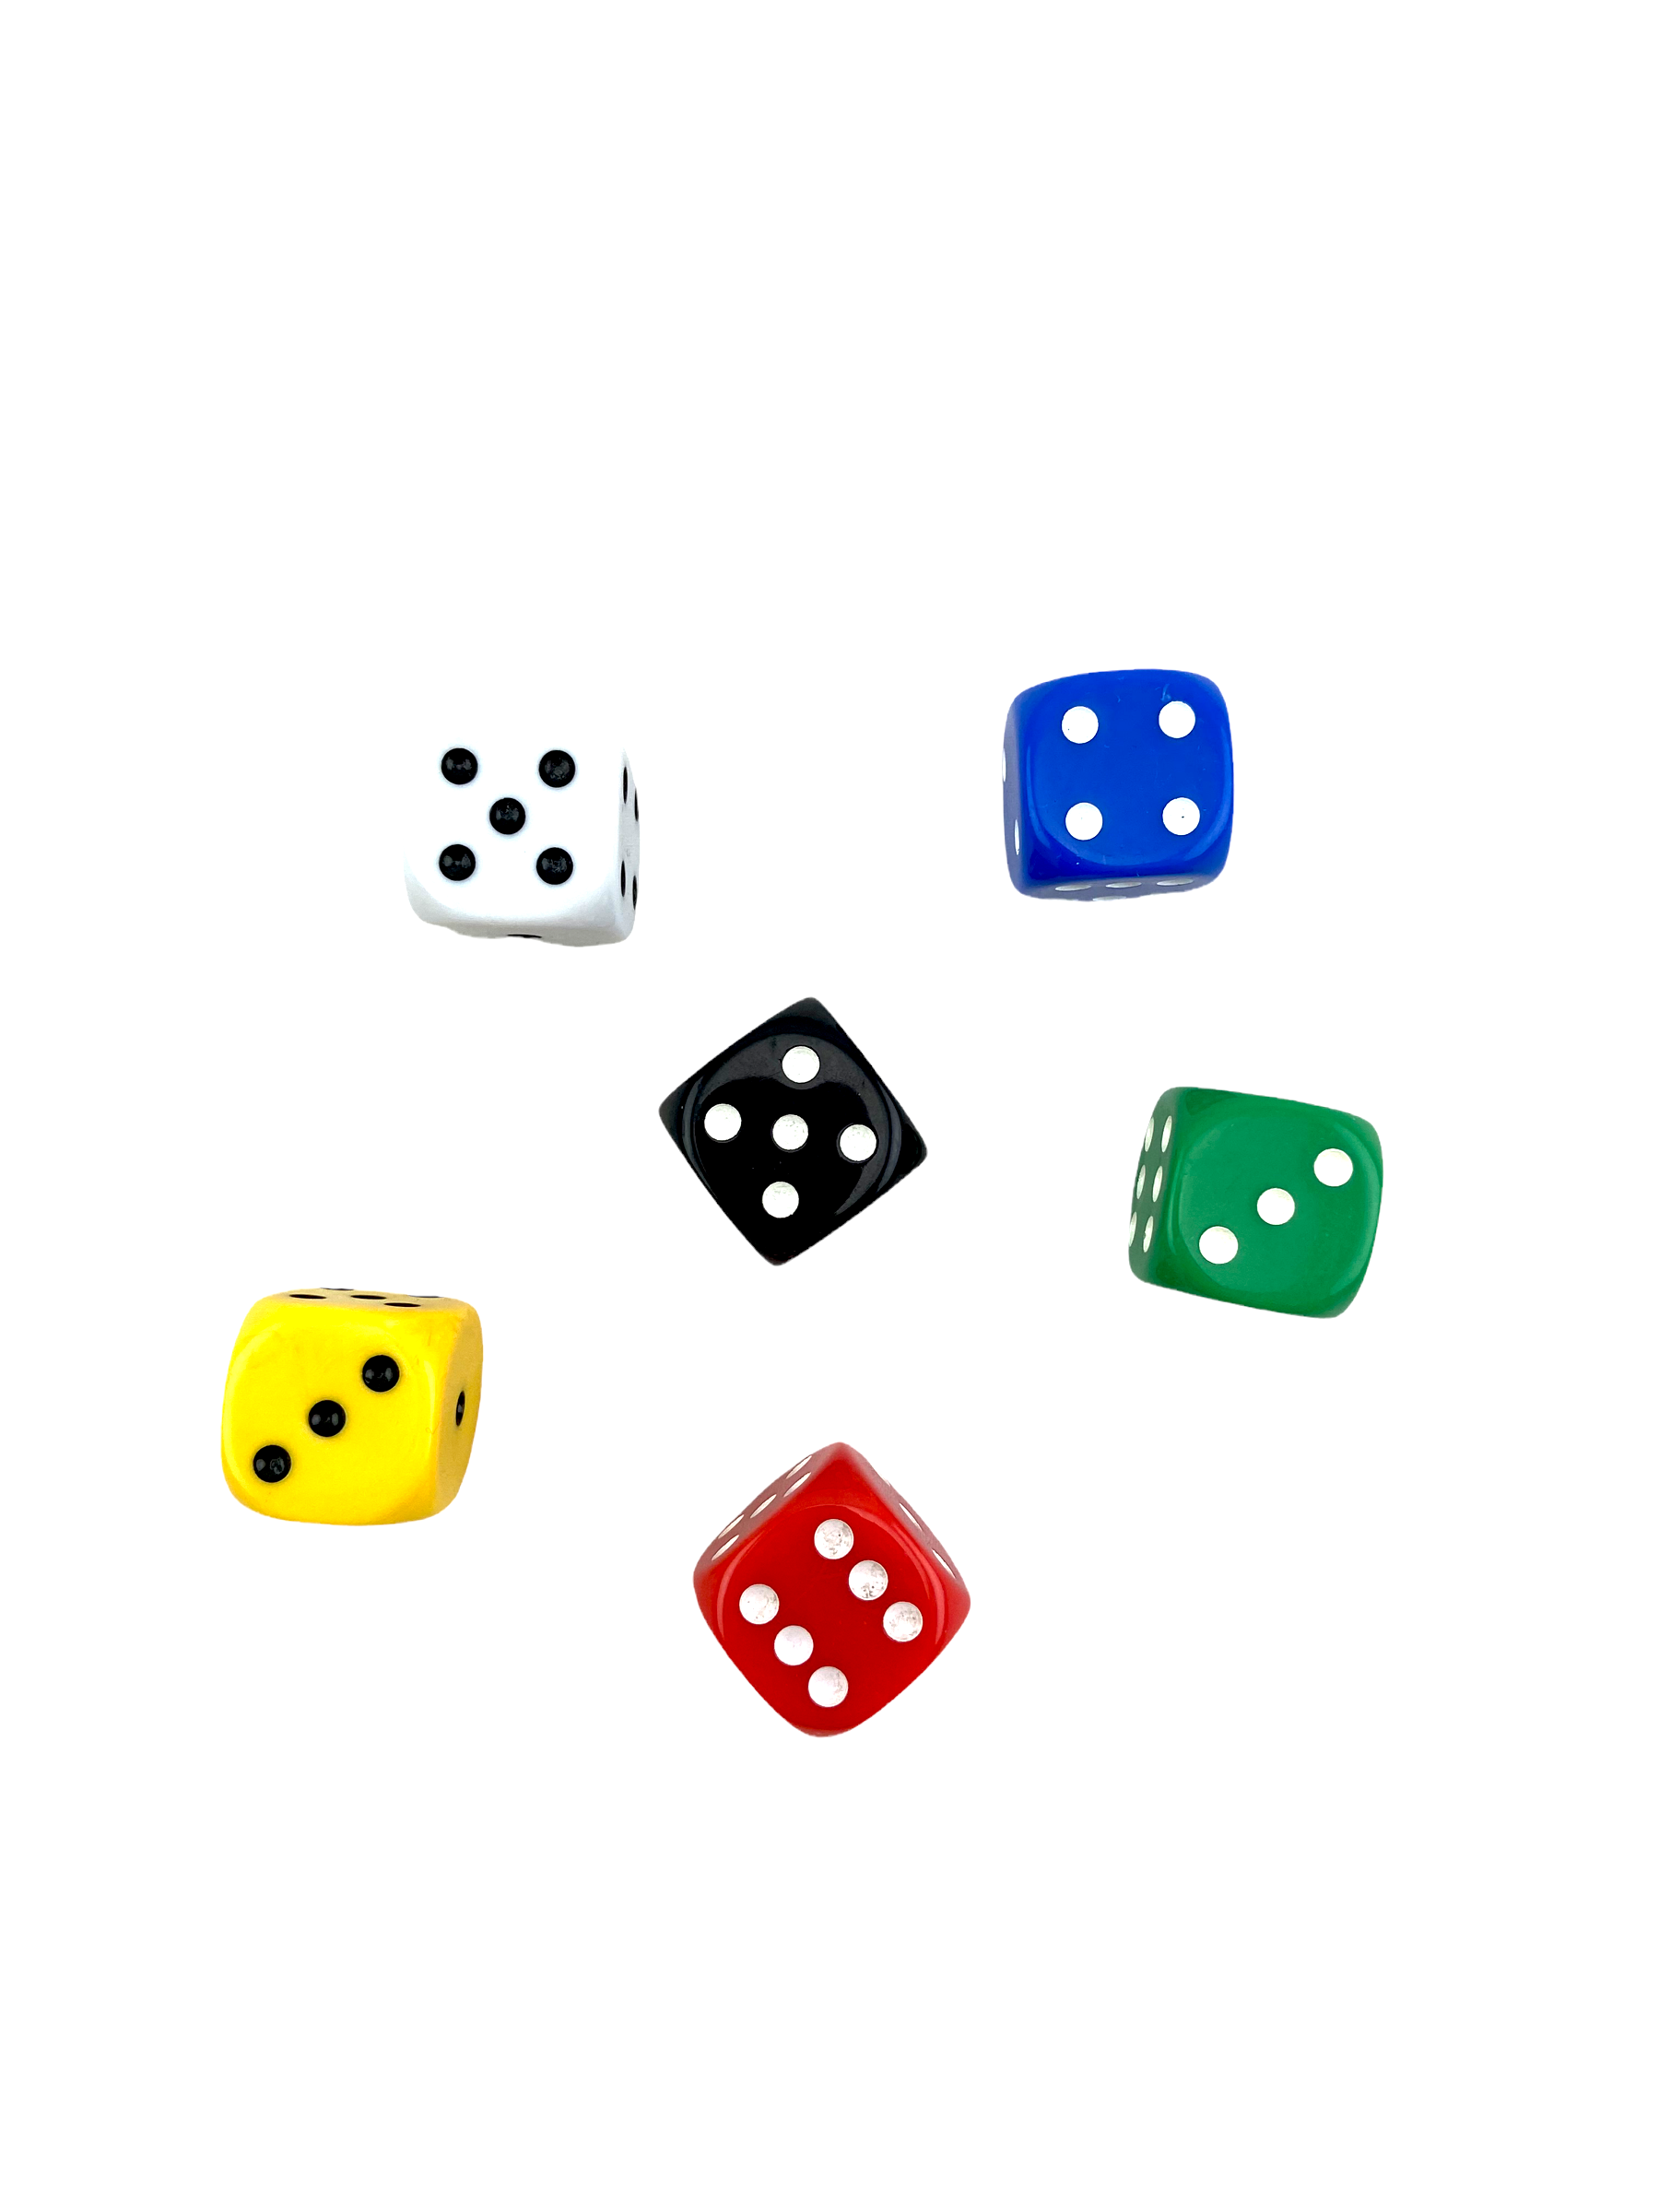 6 multicoloured Dot dice 16mm placed on white back ground